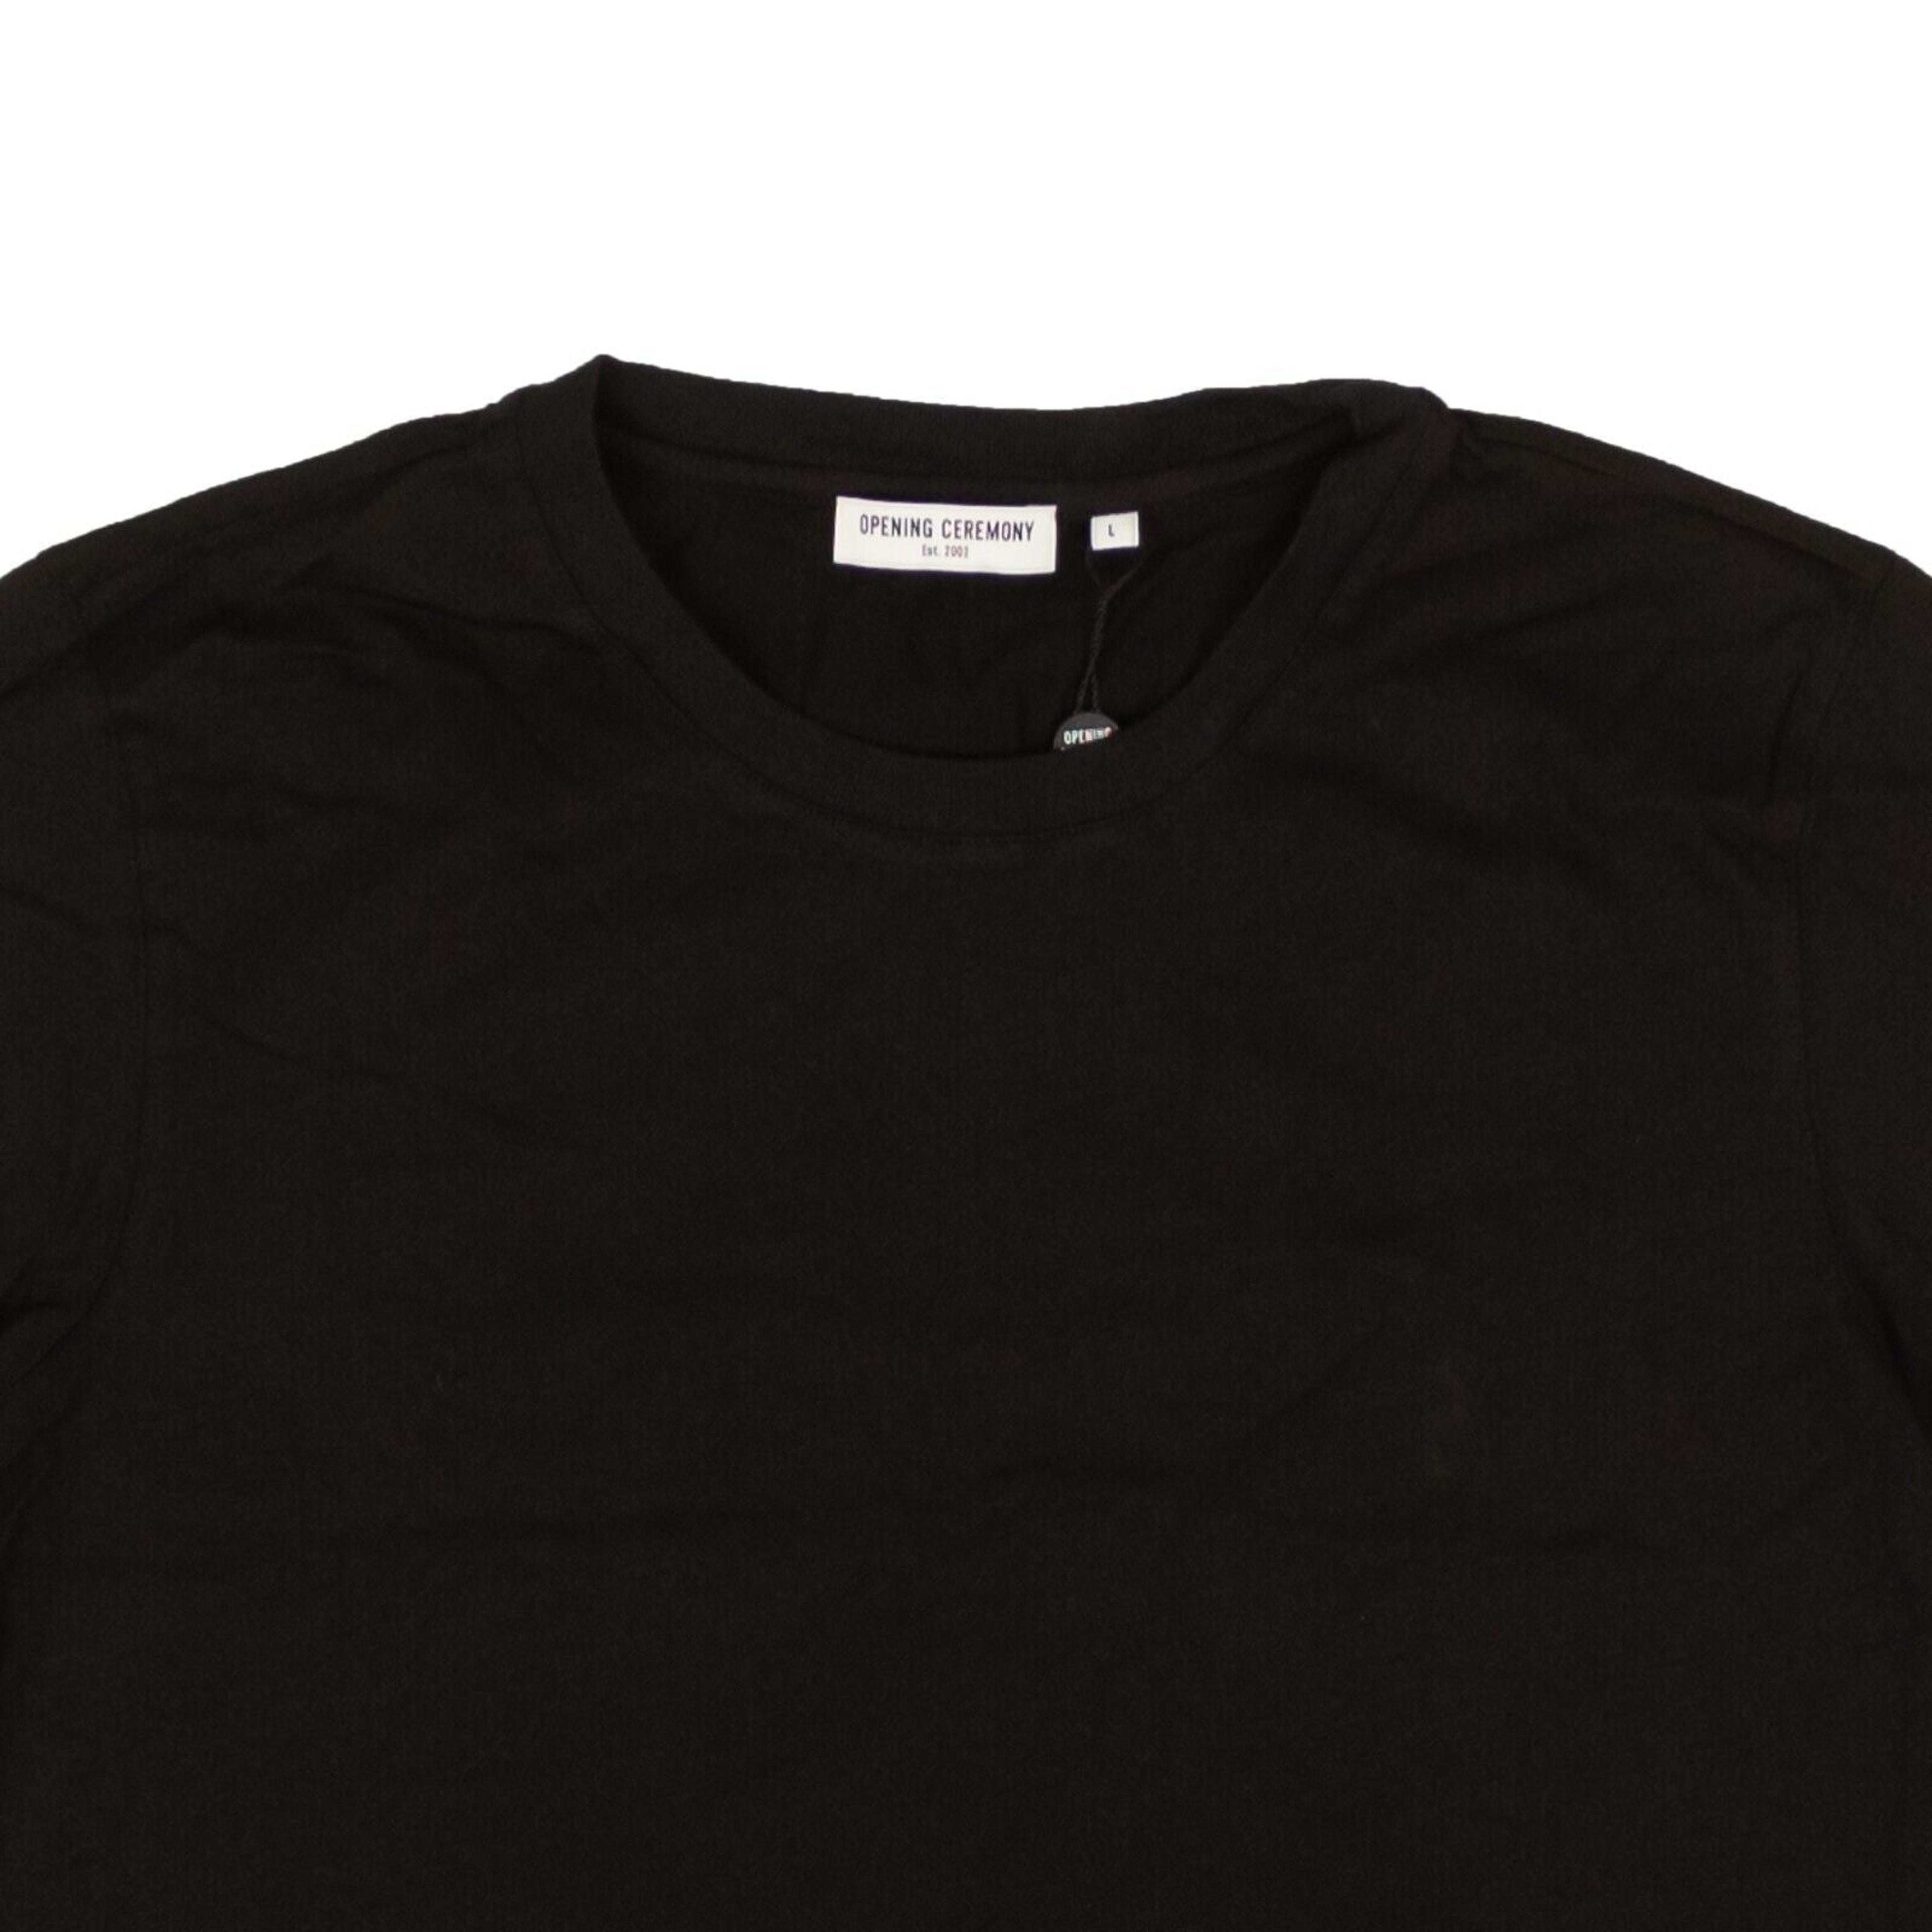 Alternate View 1 of Opening Ceremony Blank Oc Cropped T-Shirt - Black